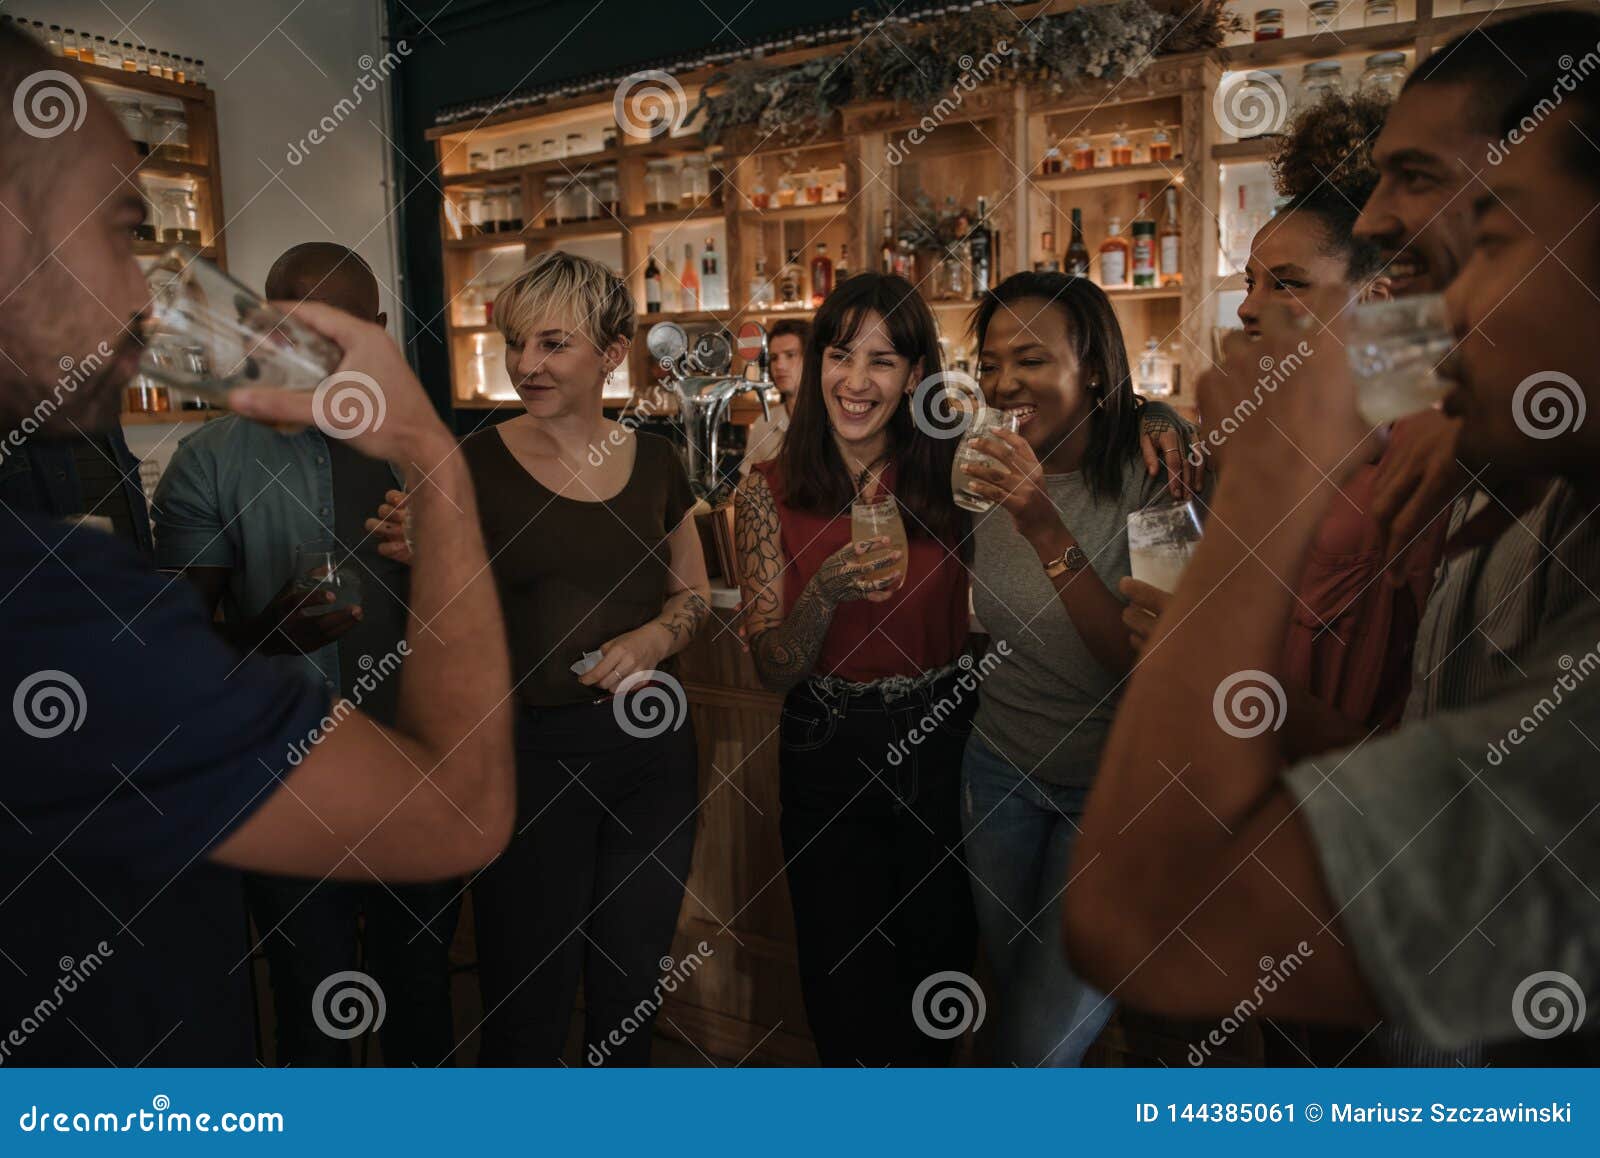 Friends Drinking And Talking Together In A Bar At Night Stock Image